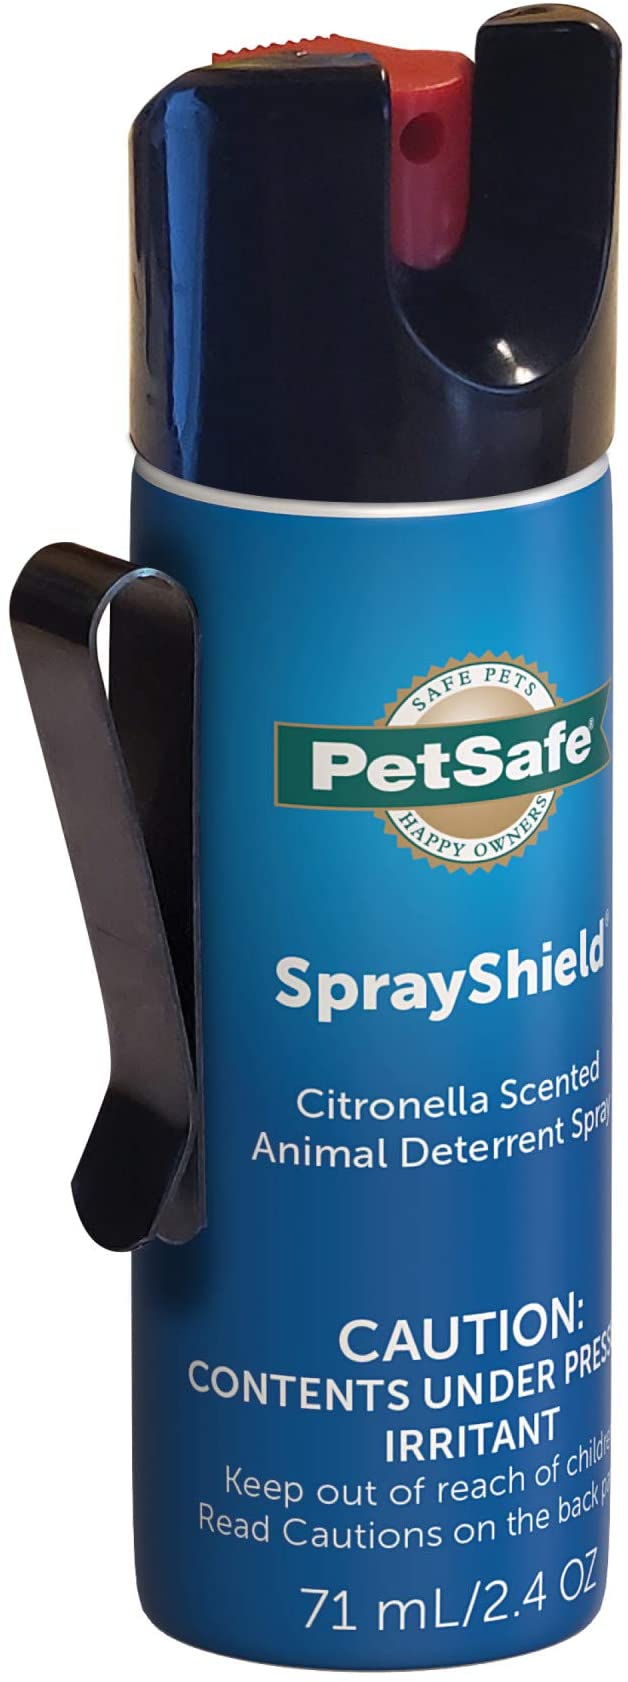 PetSafe SprayShield Animal Deterrent with Clip - Citronella Dog Repellent Spray " Ranges up to 10 ft - 2.4 oz / 71 mL - Protect Yourself and Your Pets